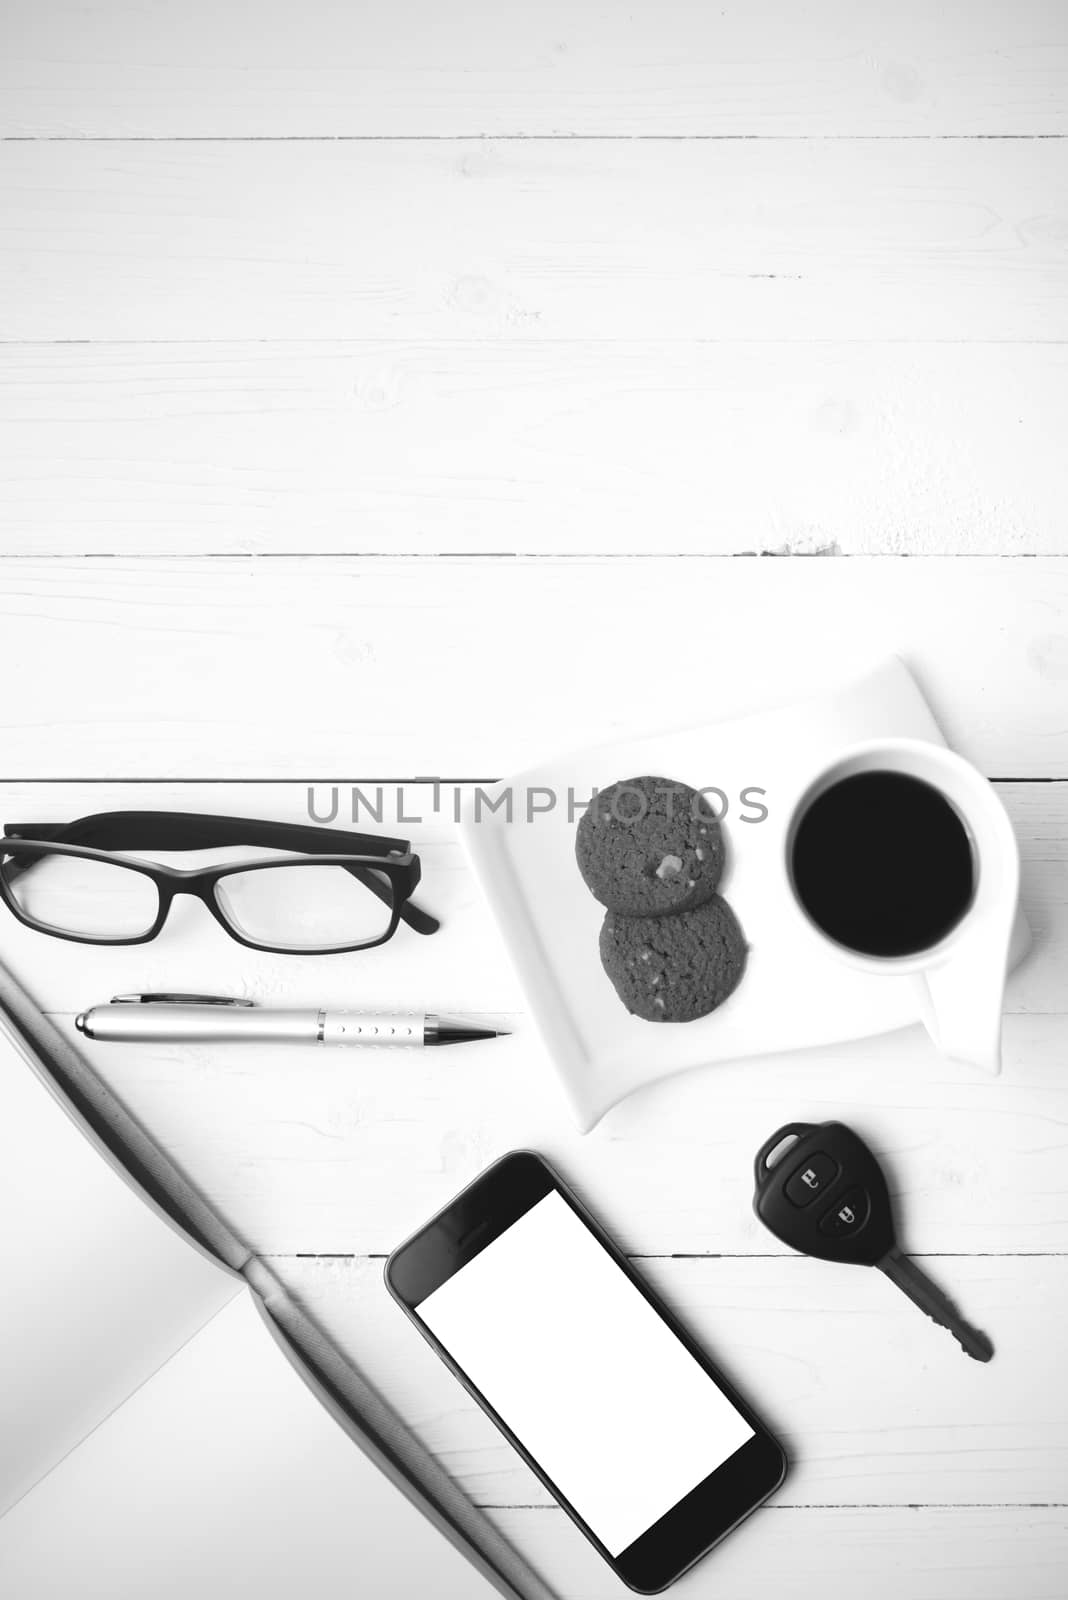 coffee cup with cookie,phone,open notebook,car key and eyeglasse by ammza12